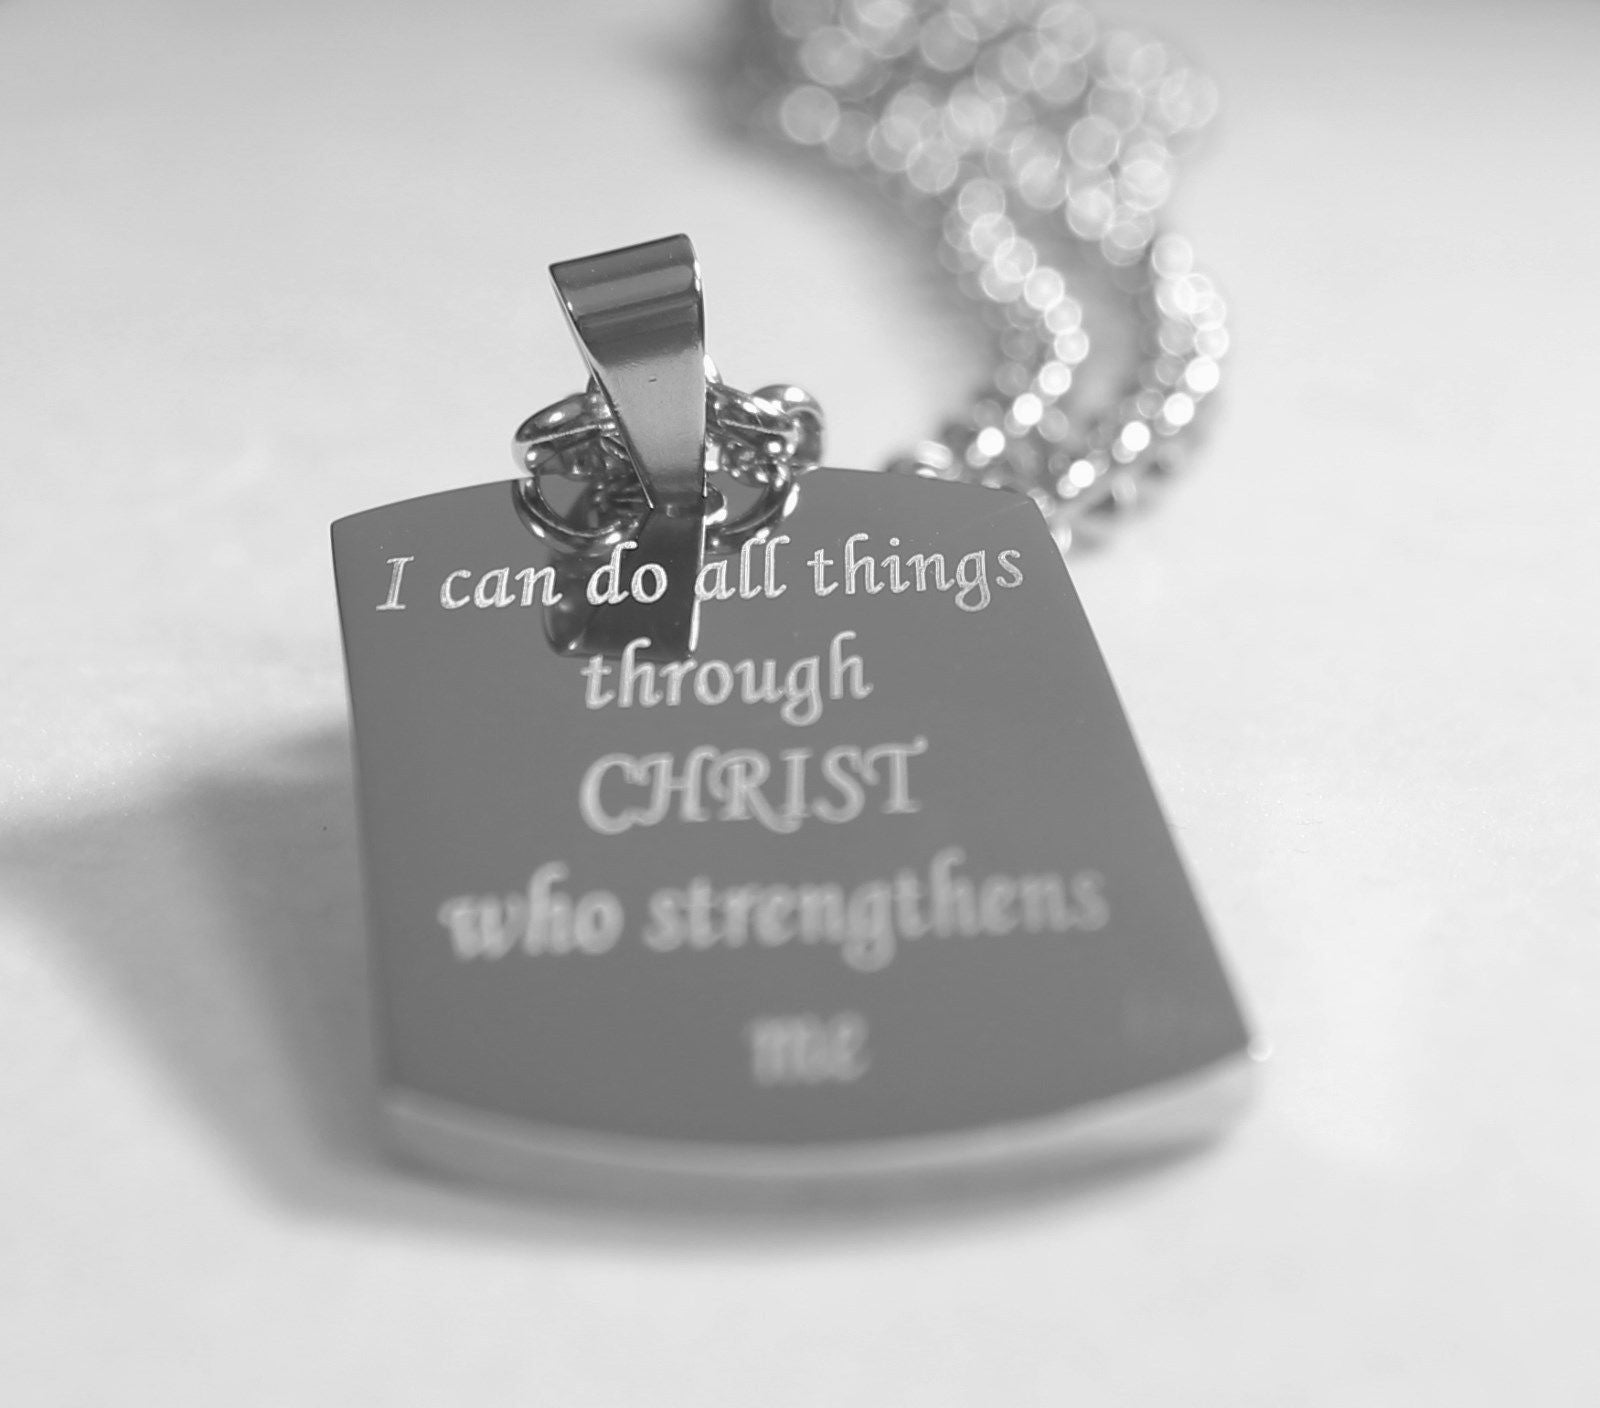 PRAYER I CAN DO ALL THINGS CHRIST THICK STAINLESS STEEL SOLID PENDANT DOG TAG - Samstagsandmore